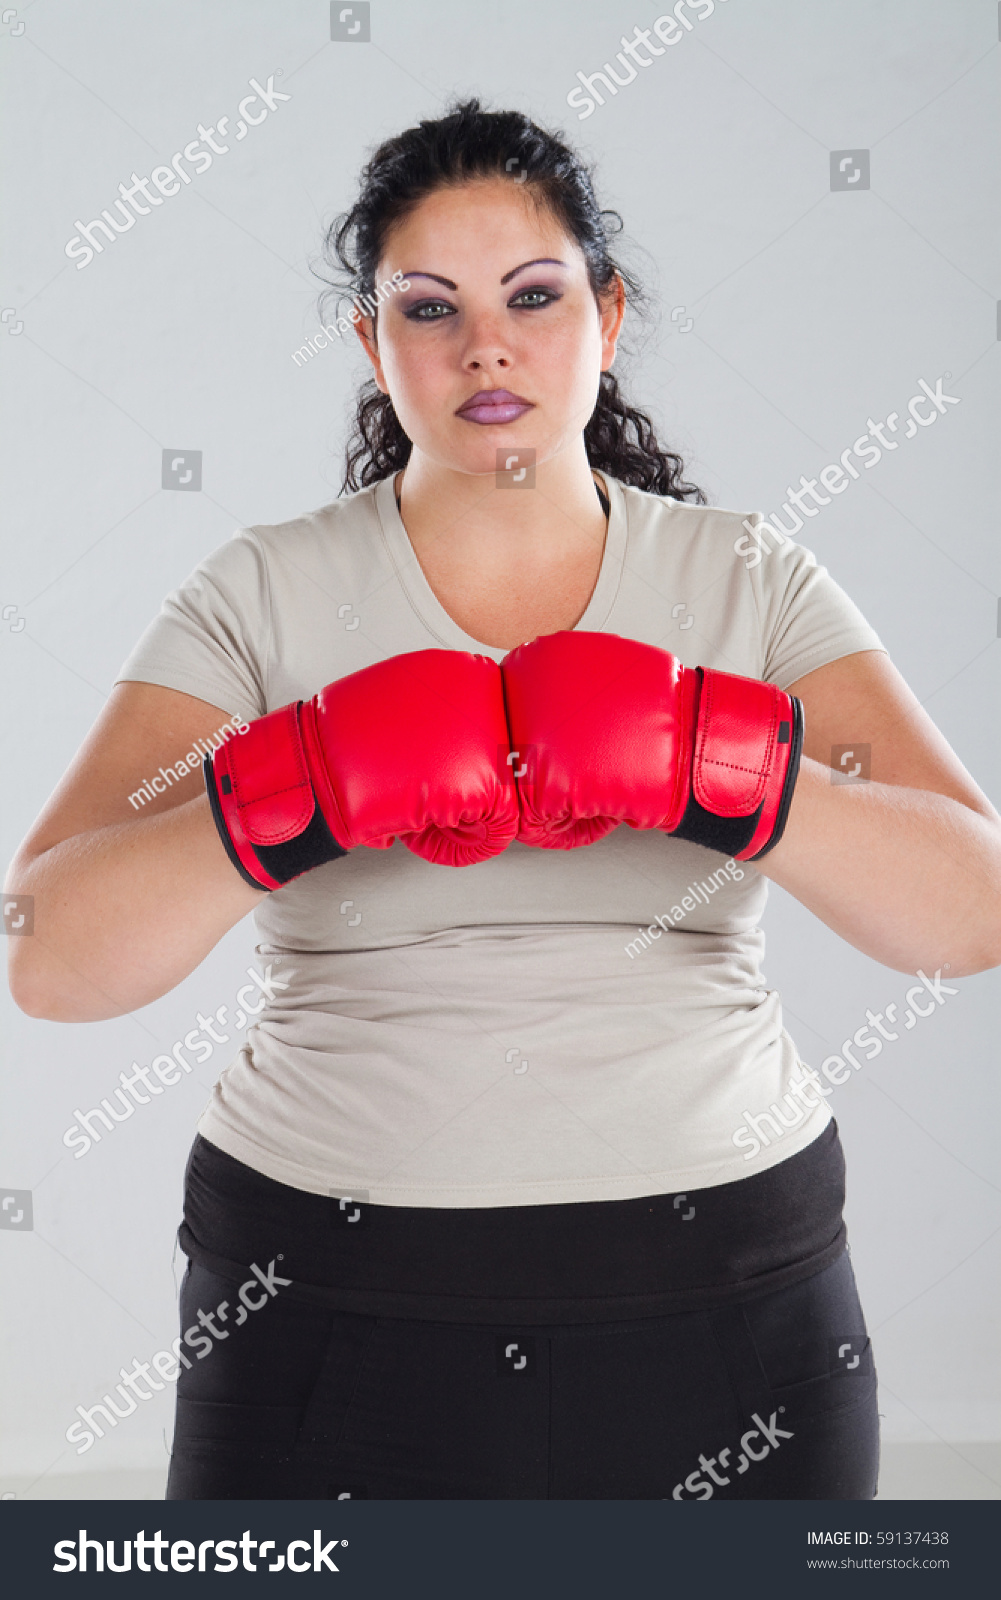 Female Plus Size Woman Boxing Gloves Stock Photo 59137438 - Shutterstock